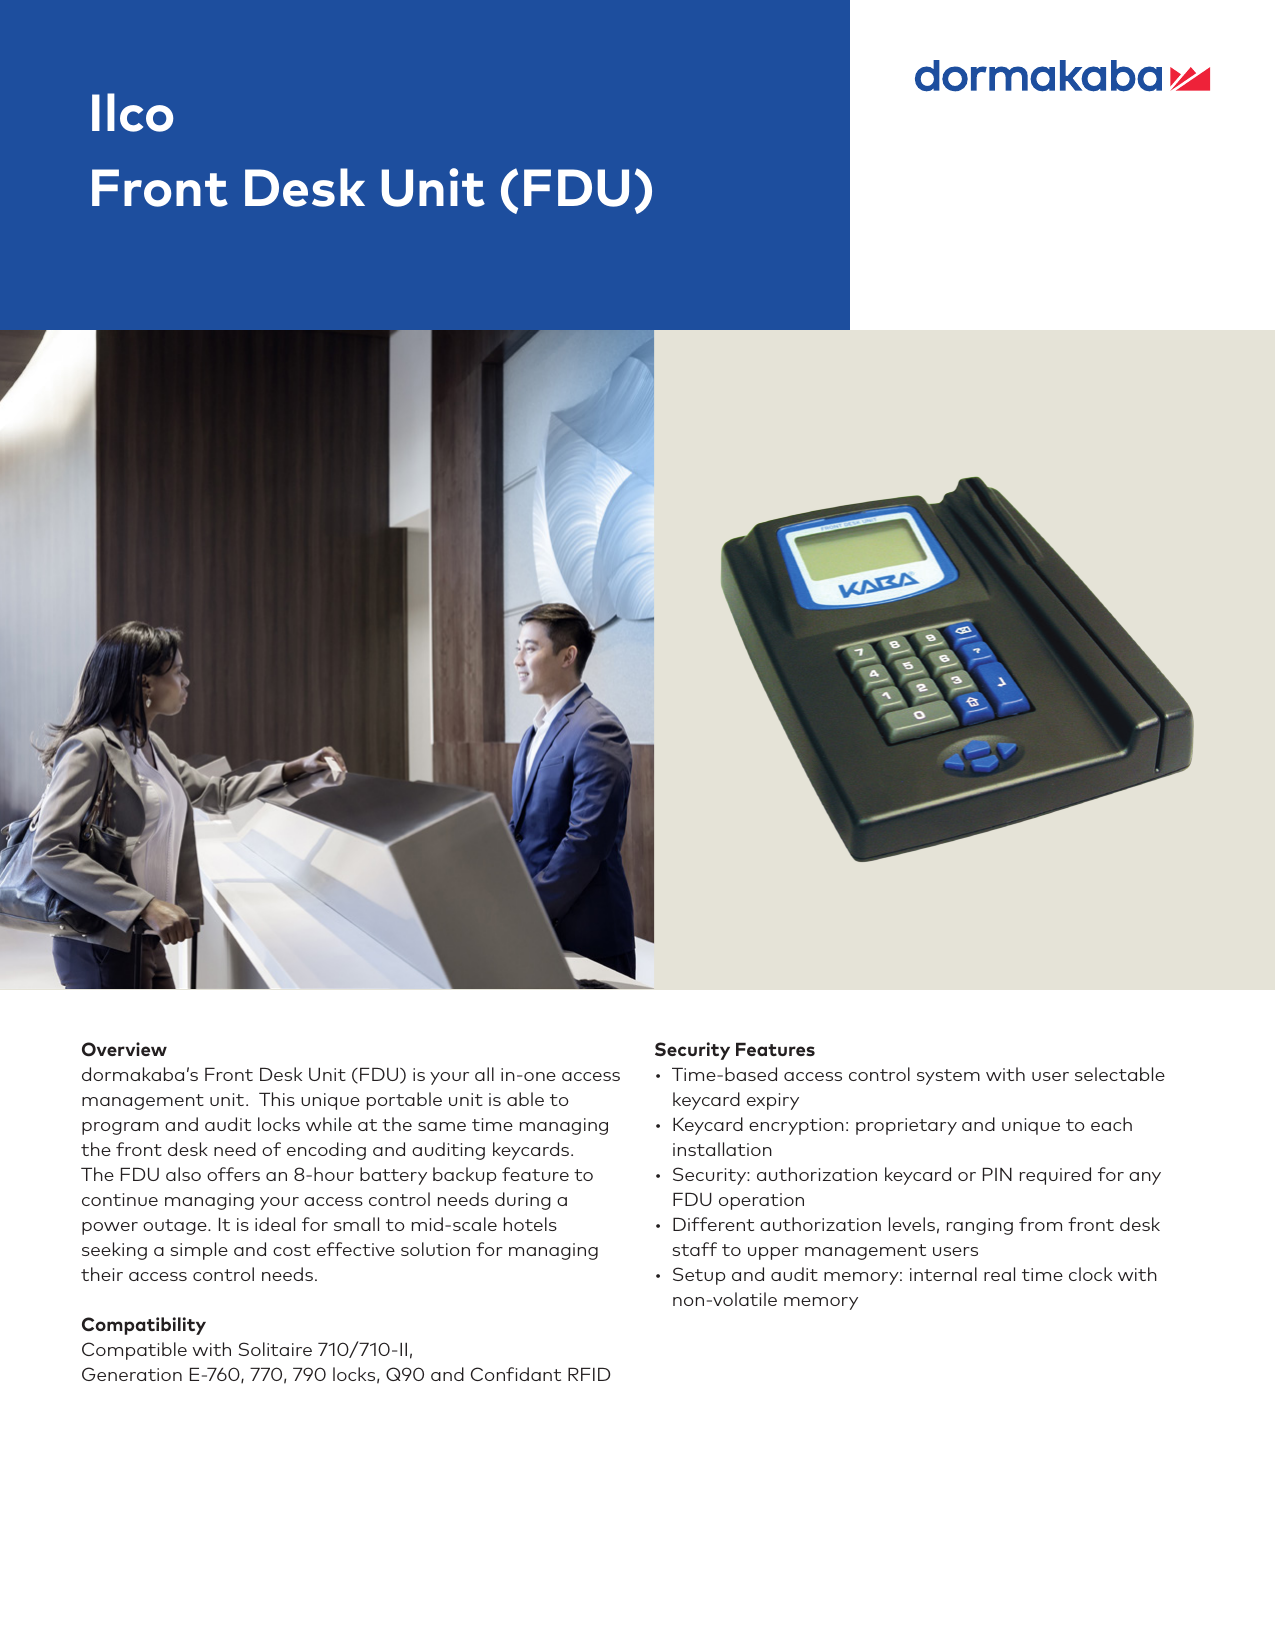 Page 1 of 2 - Kaba  ILCO Front Desk Unit (FDU) Fact Sheet [M3568] Ilco-front-desk-unit-fdu-fact-sheet-m3568